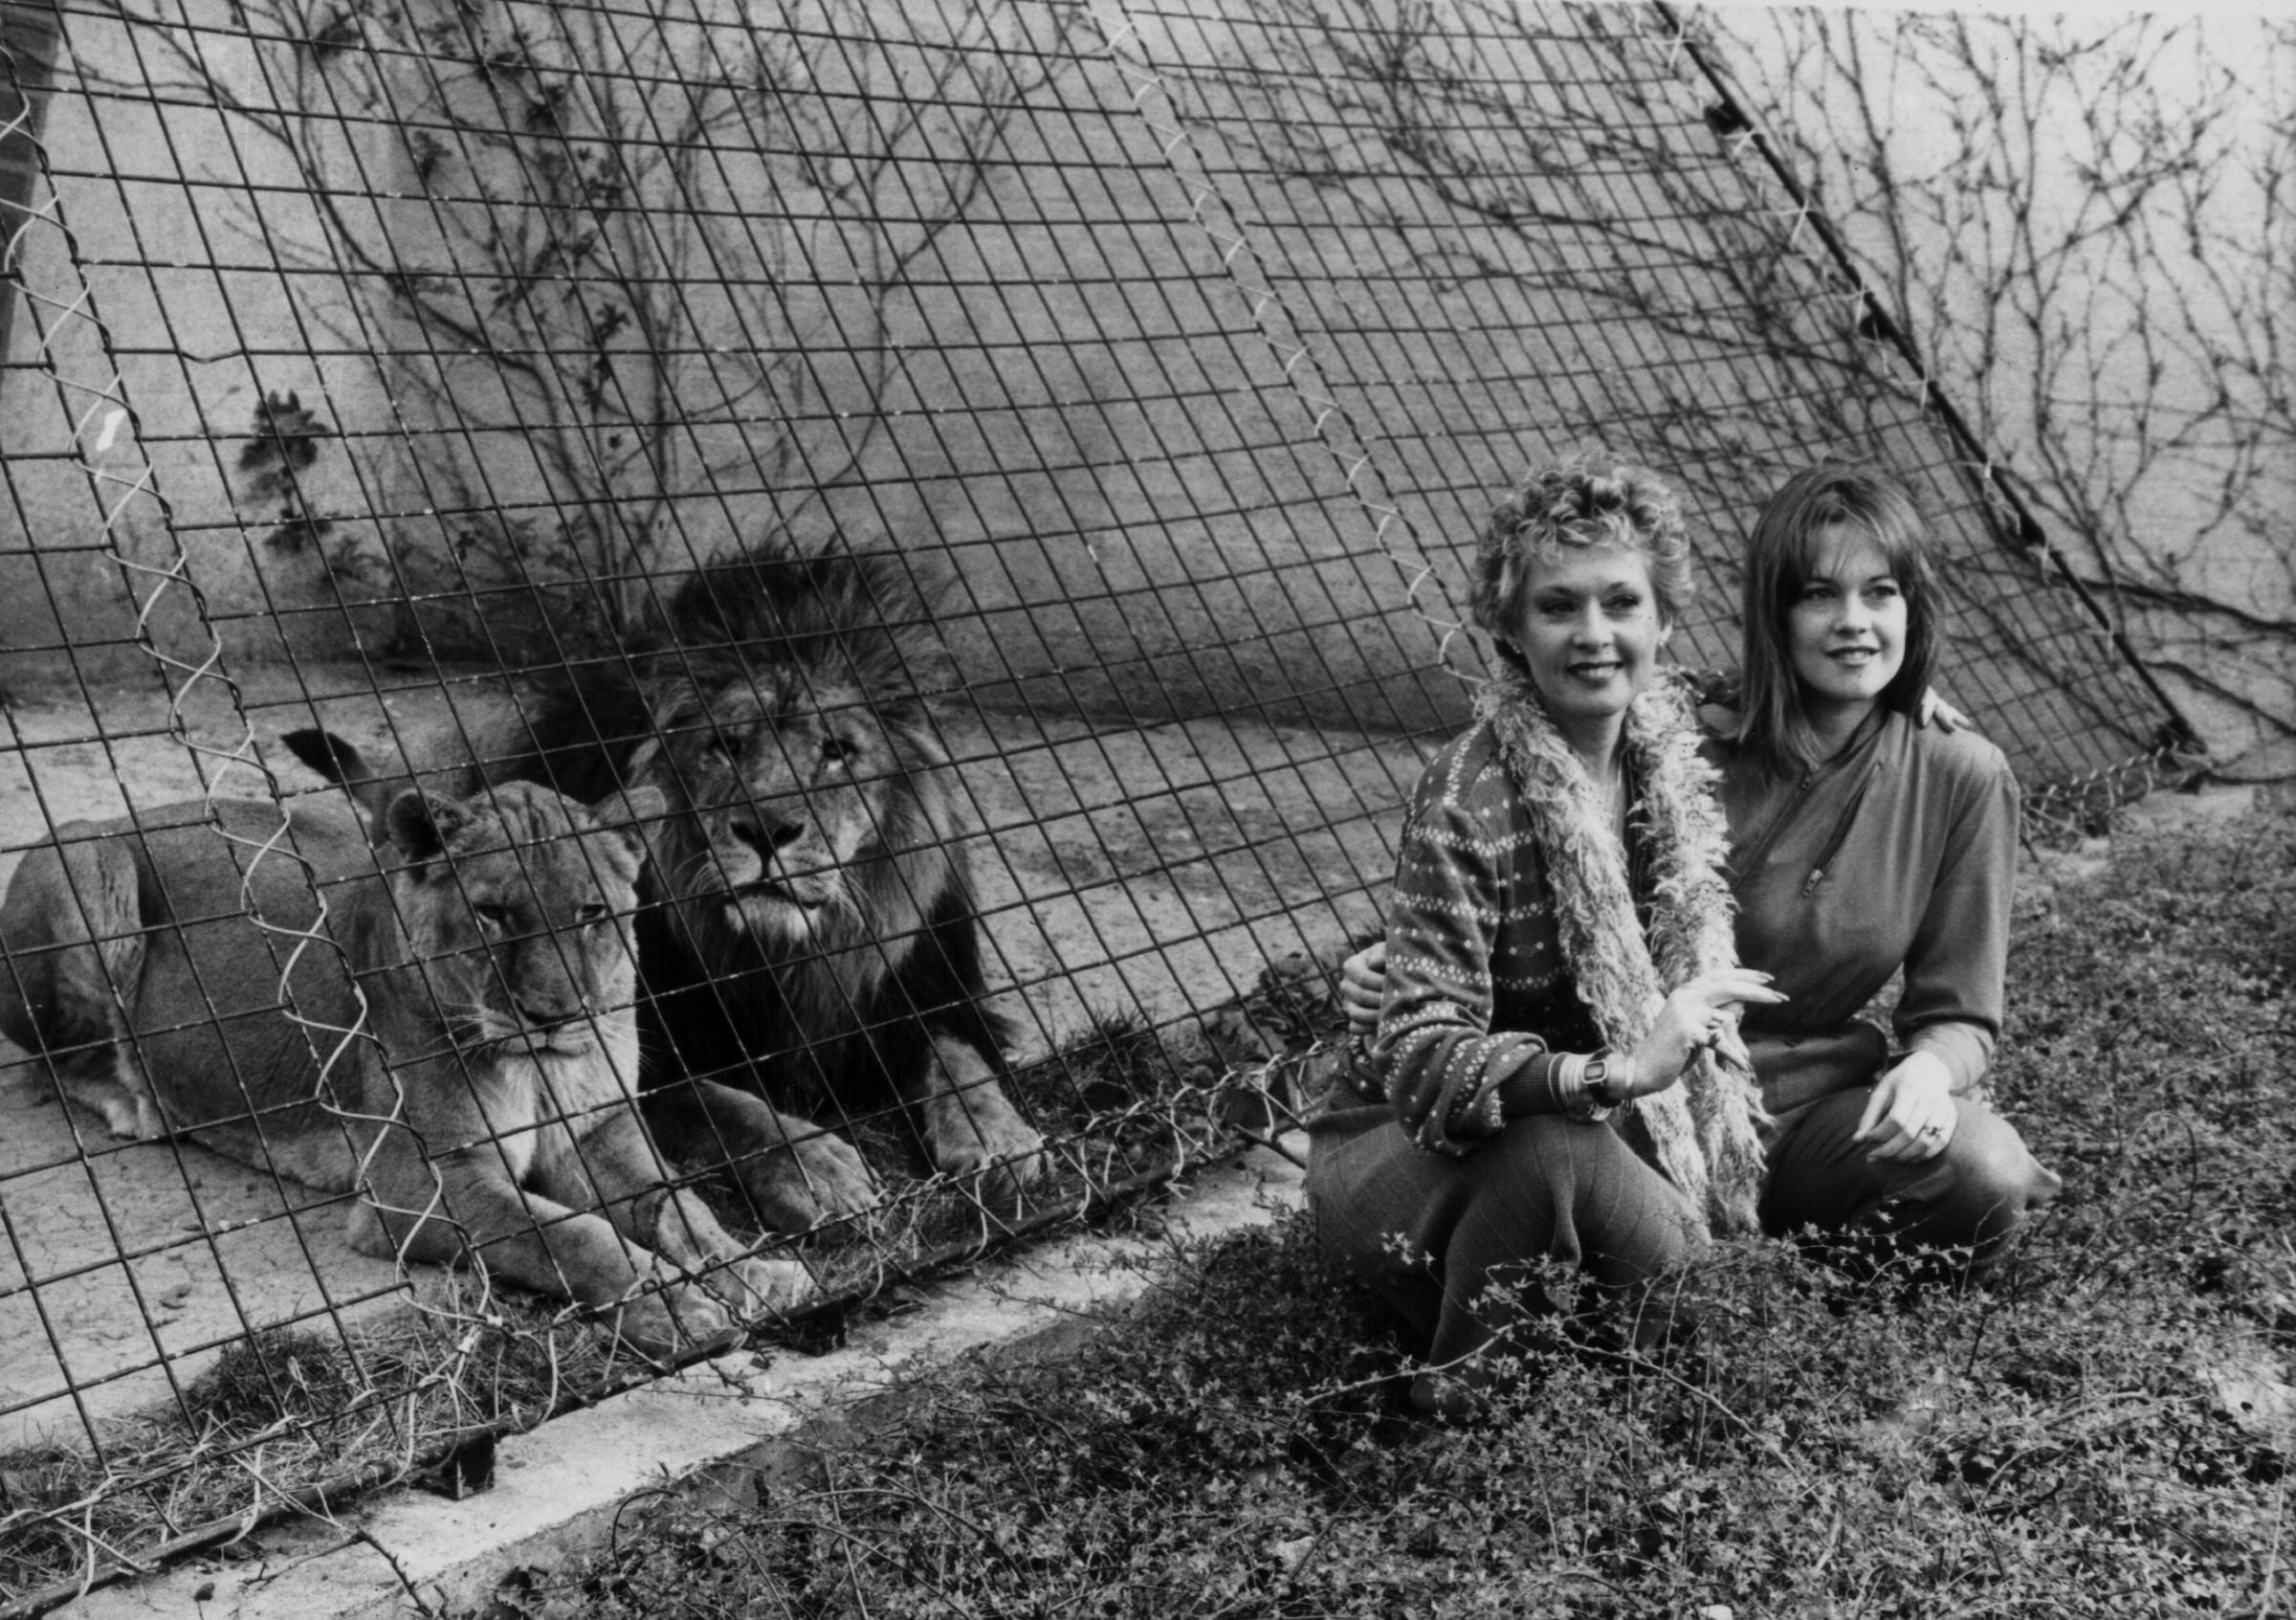 Tippi Hedren and Melanie Griffith posing with lions at London Zoo to promote the movie "Roar" on March 29, 1982, in England. | Source: Getty Images